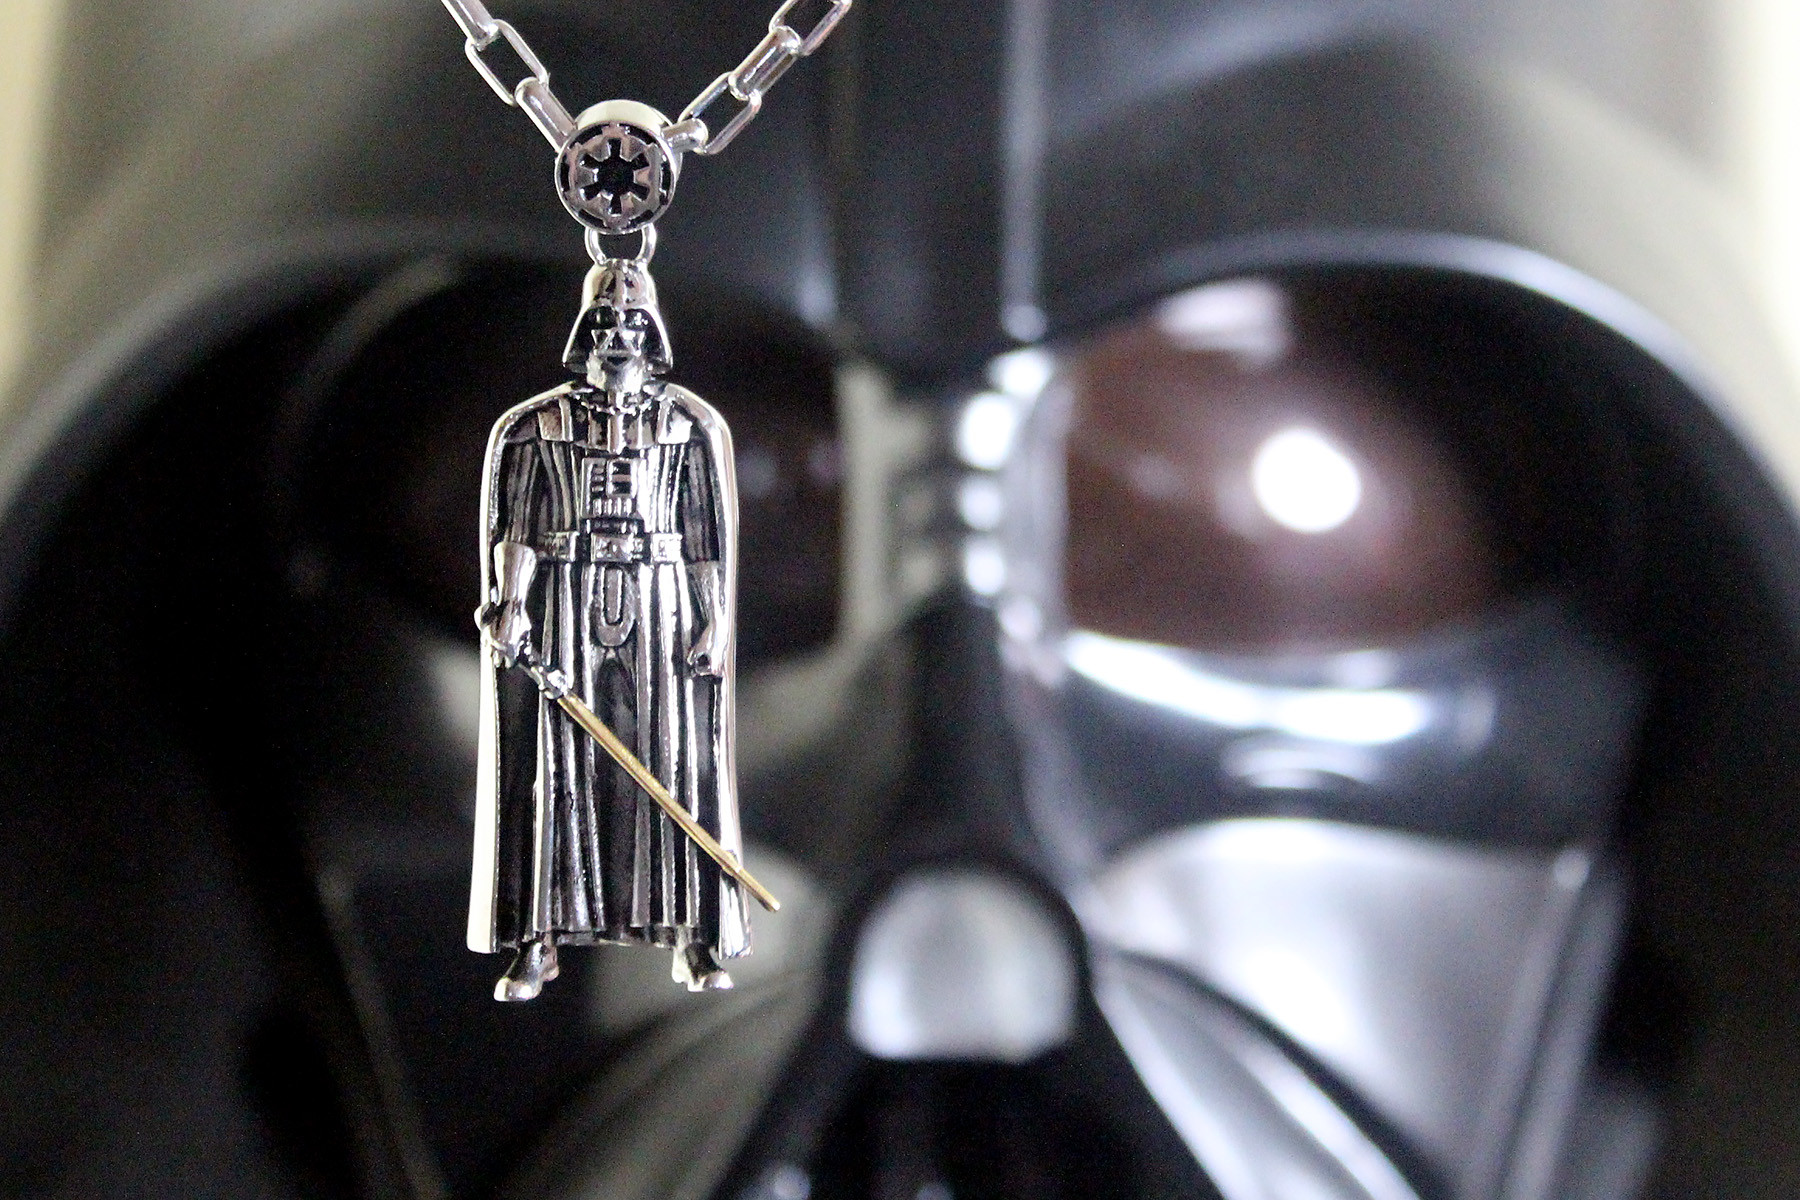 Darth Vader Jewelry Star Wars Jewelry Darth Vader Necklace Dark Side Darth  Vader Charm Star Wars Gift for Him for Men Star Wars Inspired - Etsy